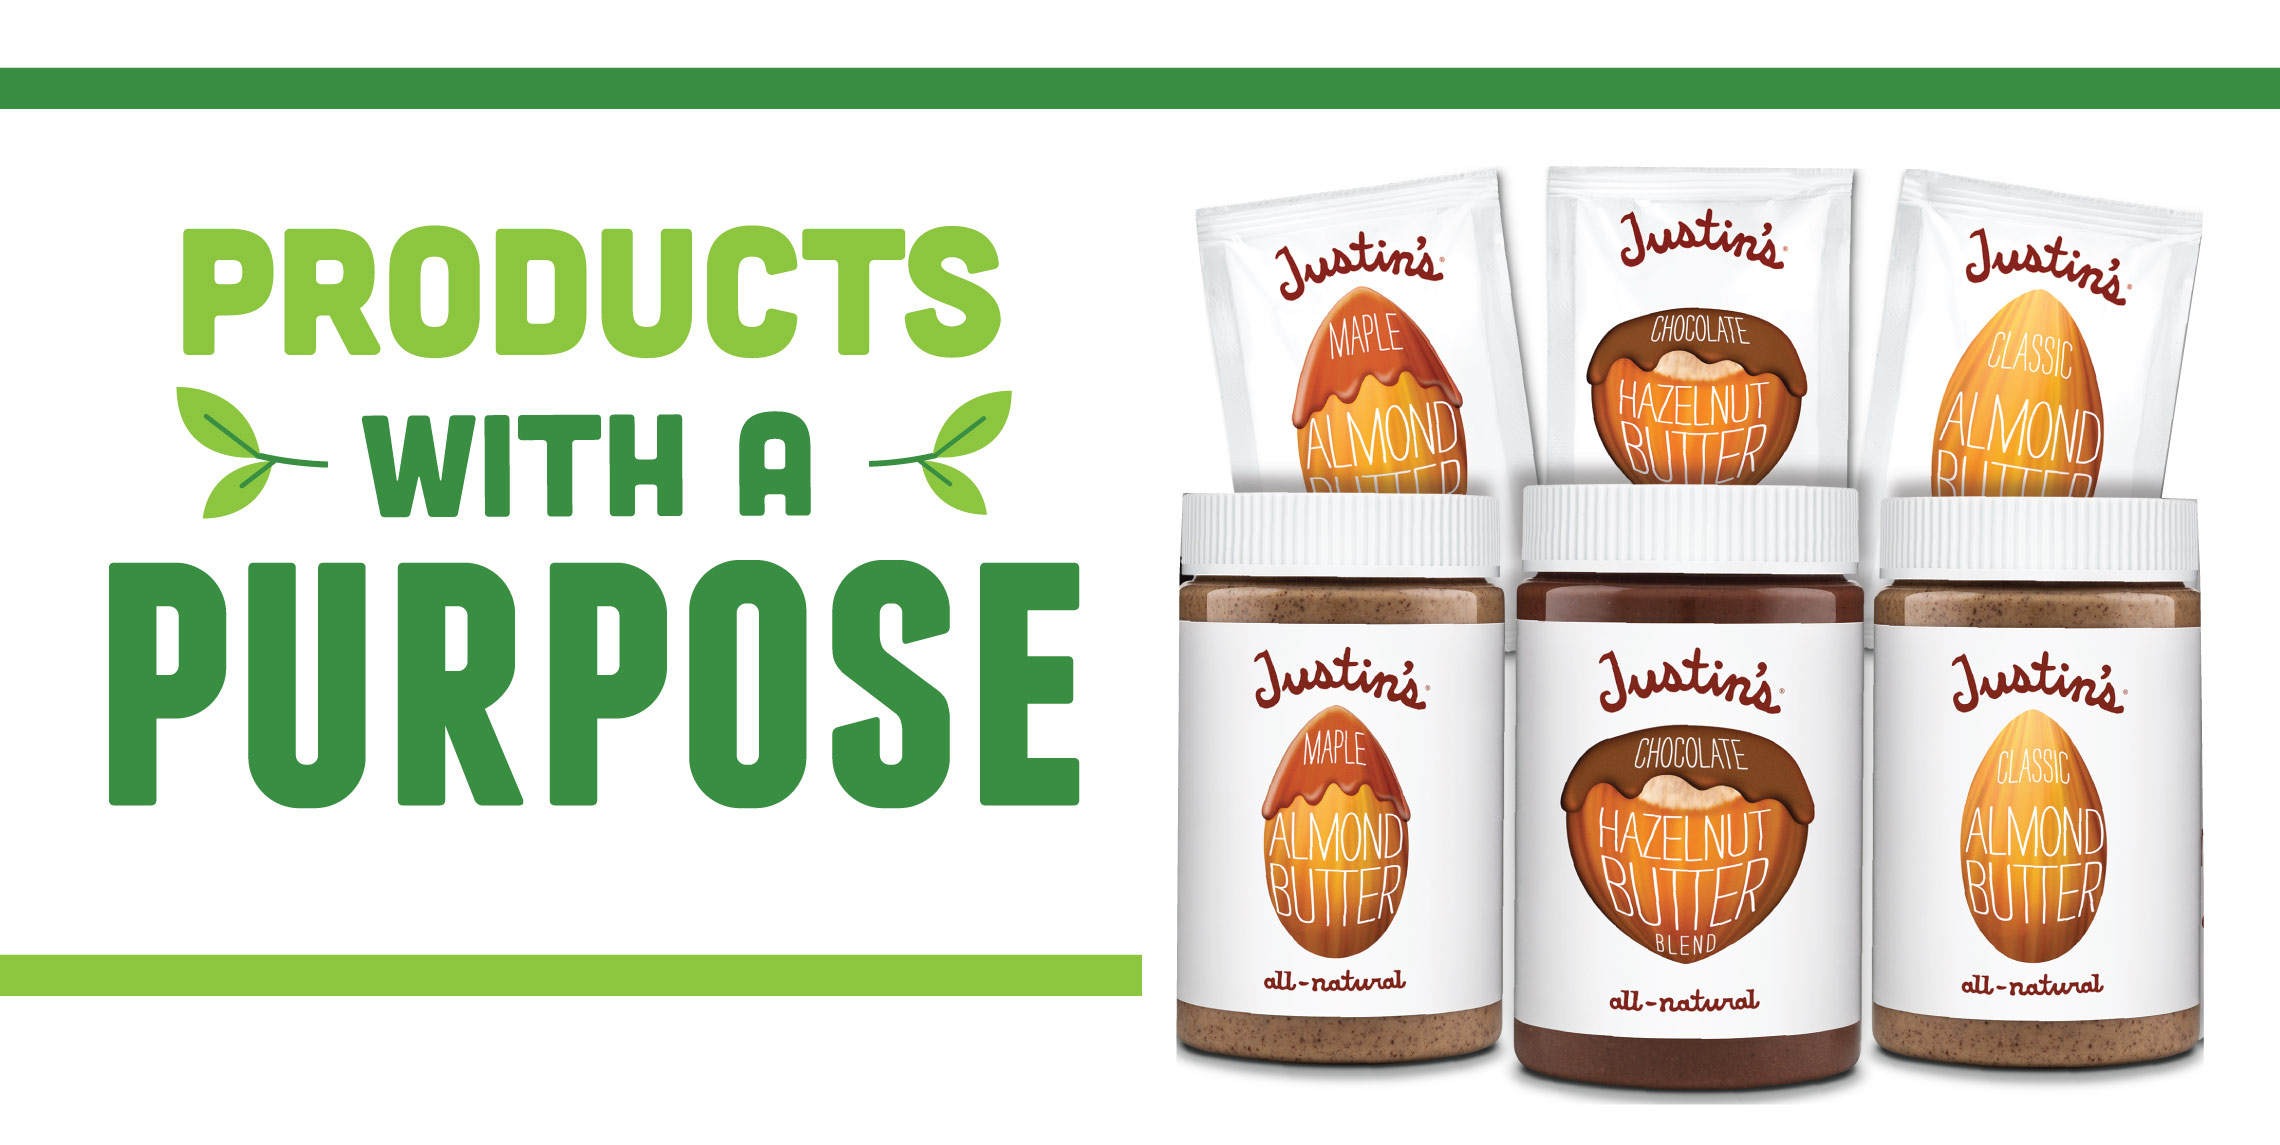 Justin's Products with a Purpose